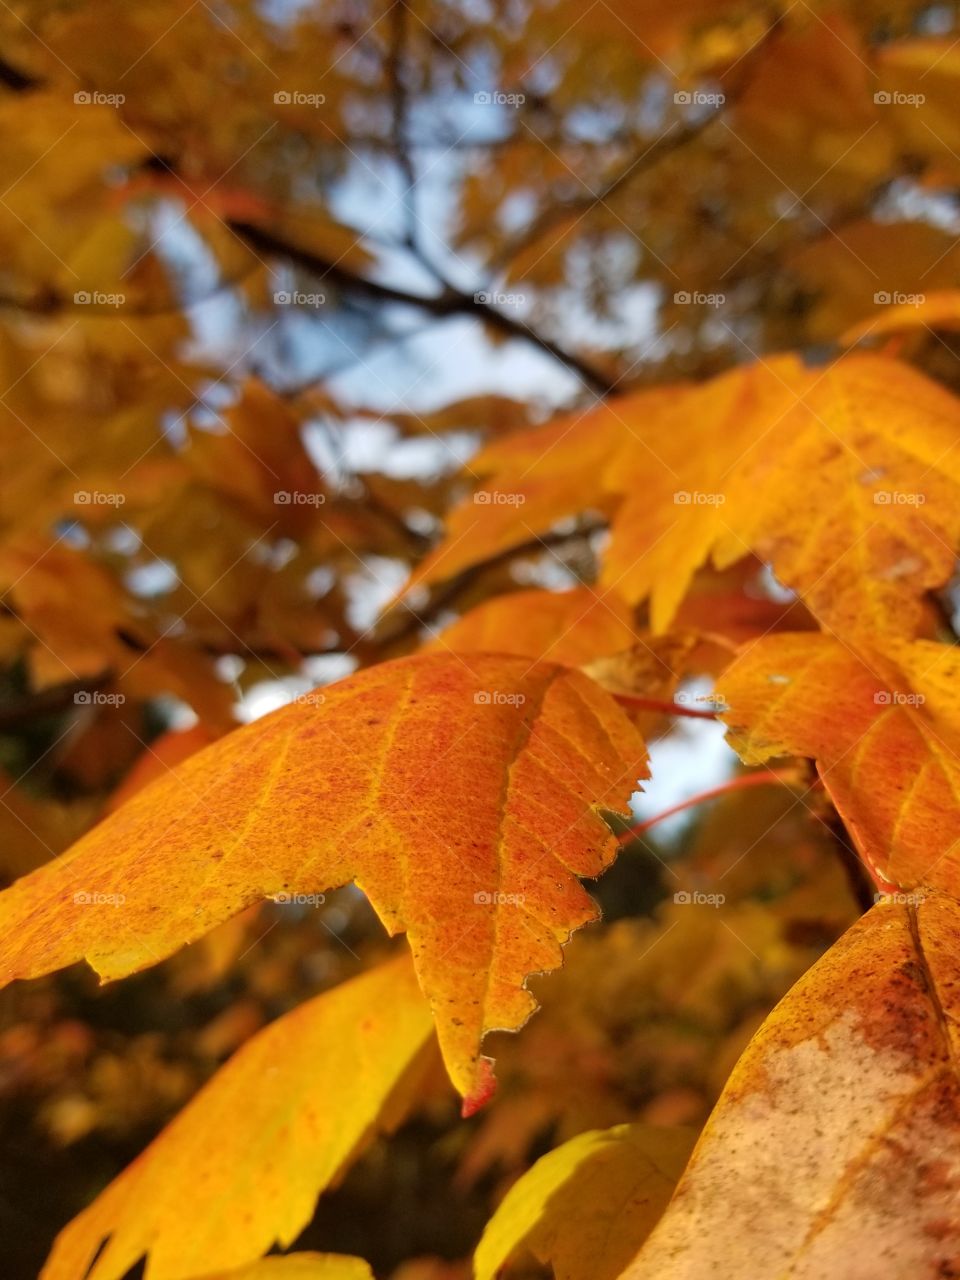 Beautiful orange leaves lit by the golden light of the sunset. Photo taken by me on a Samsung S8.